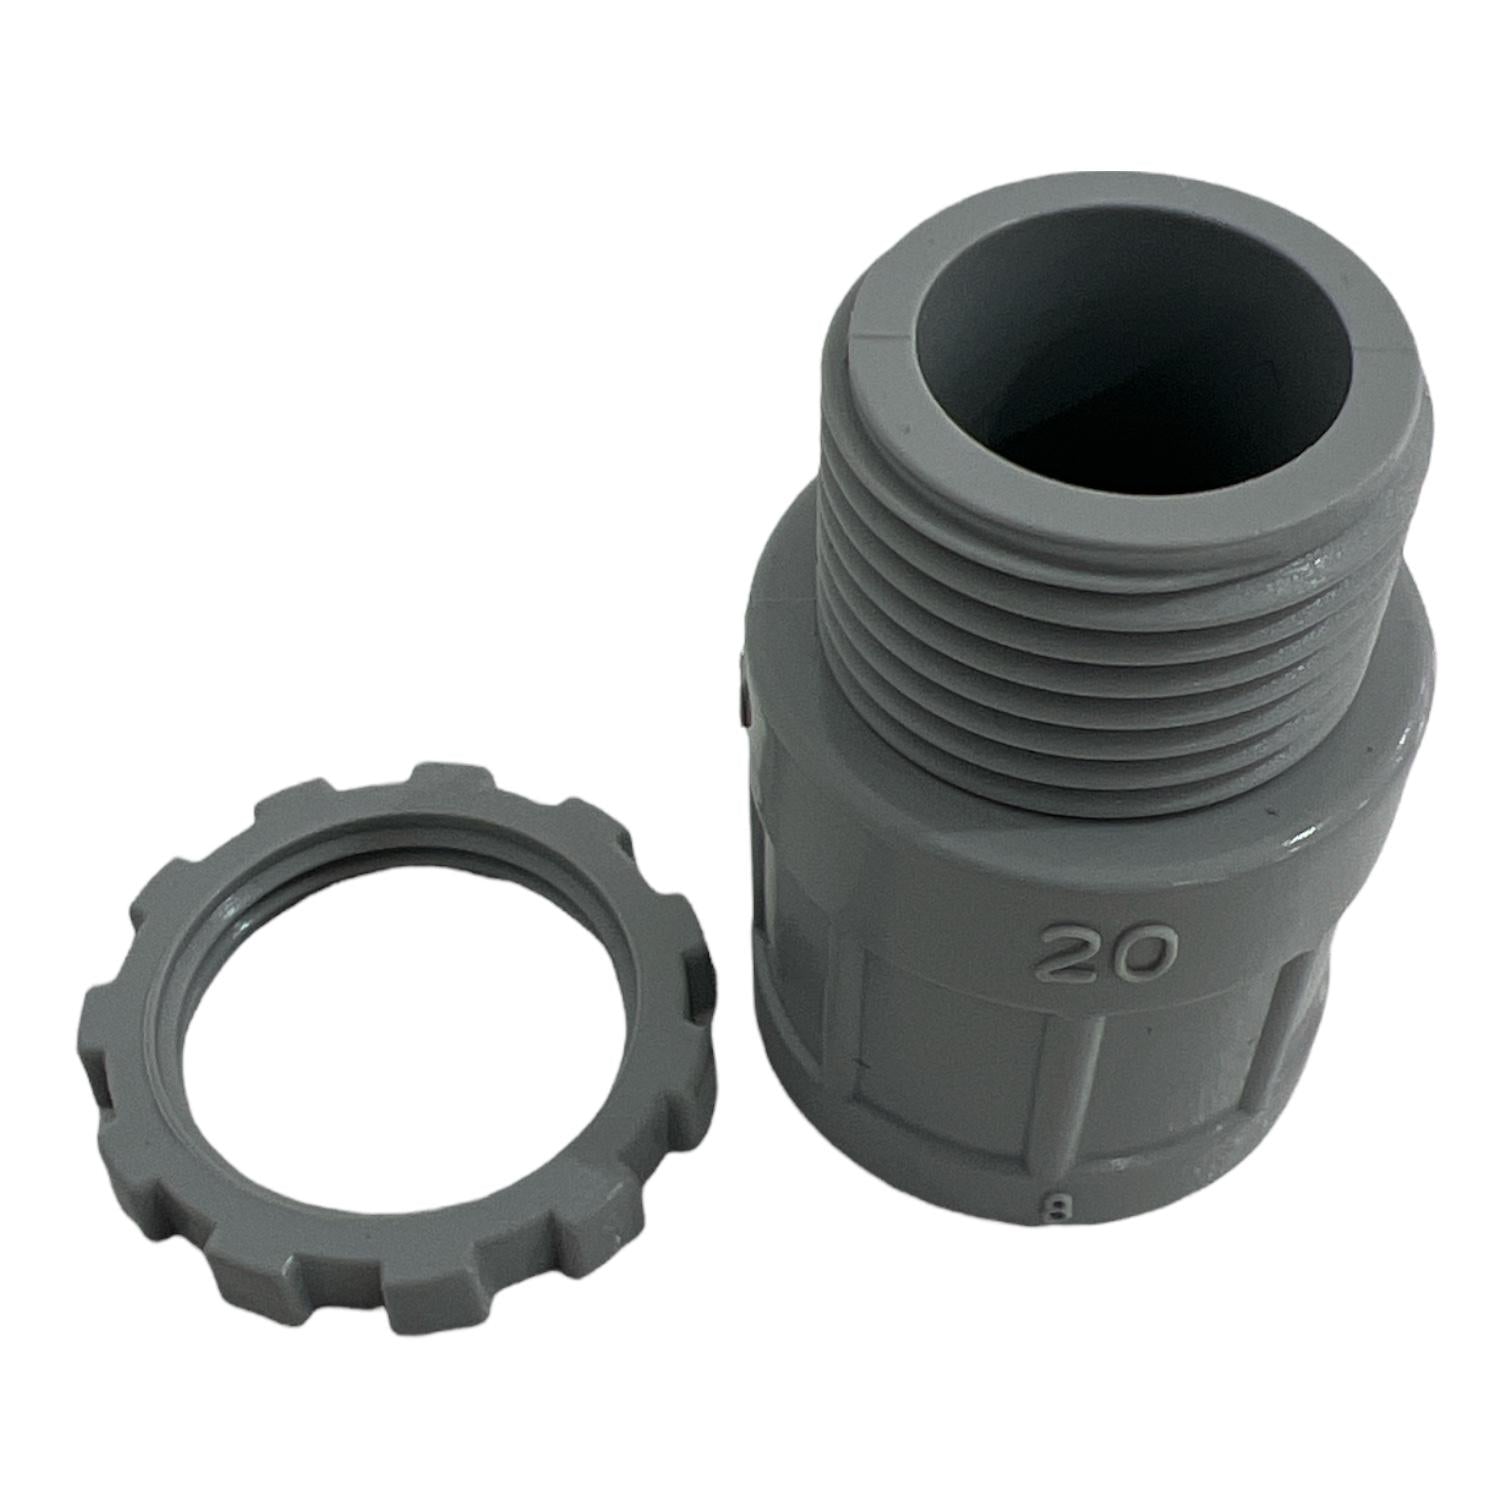 Plain to Screw Adaptor with Lock Ring 20mm